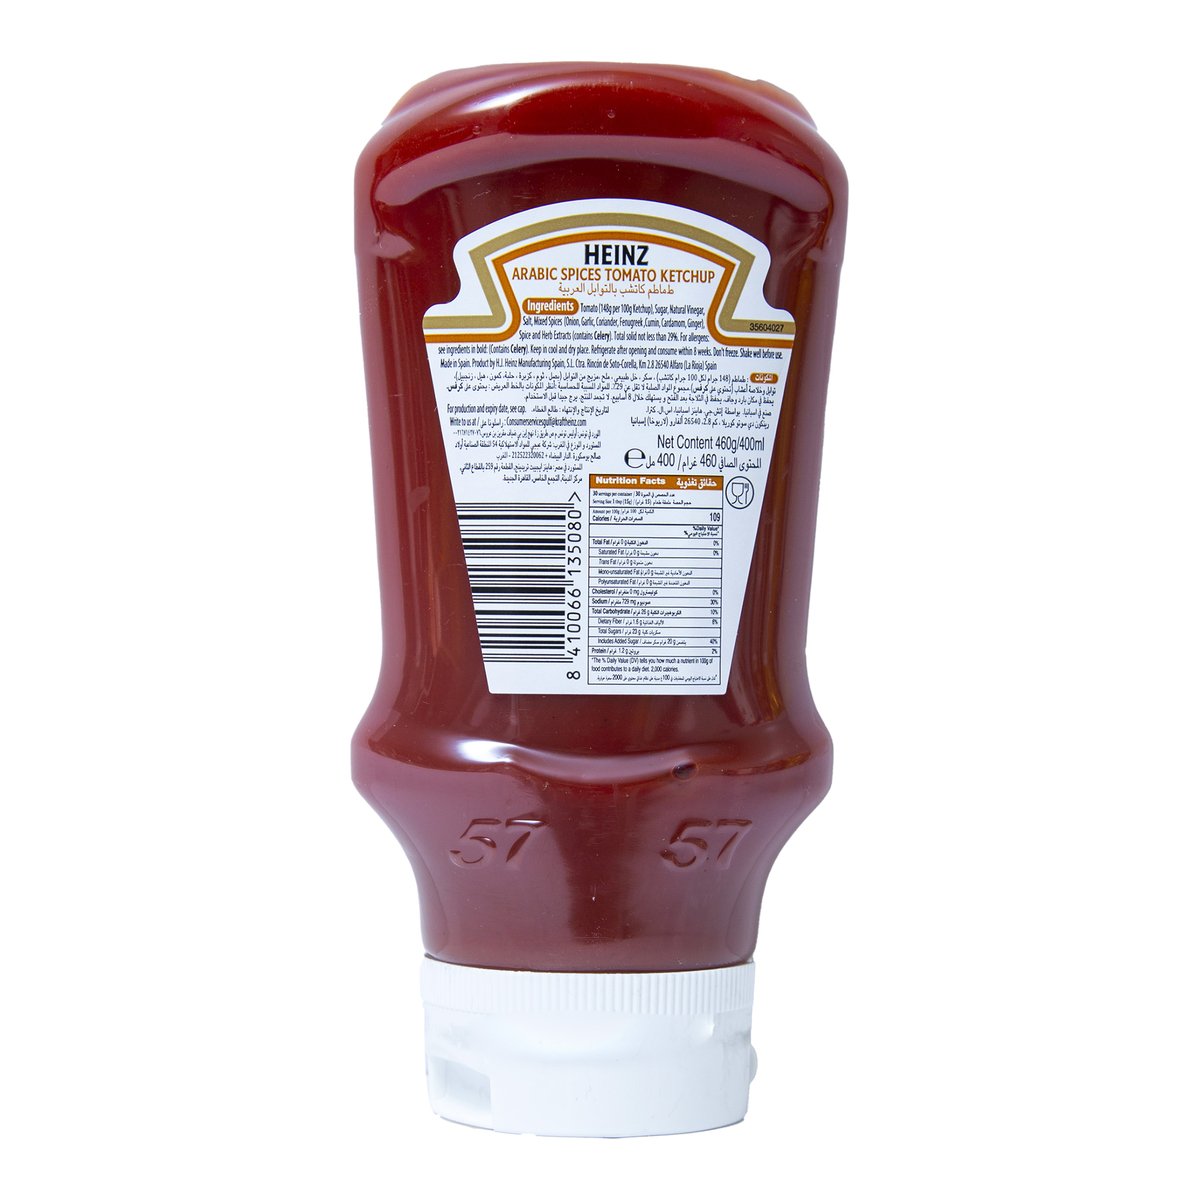 Heinz Arabic Spices Tomato Ketchup 400 ml